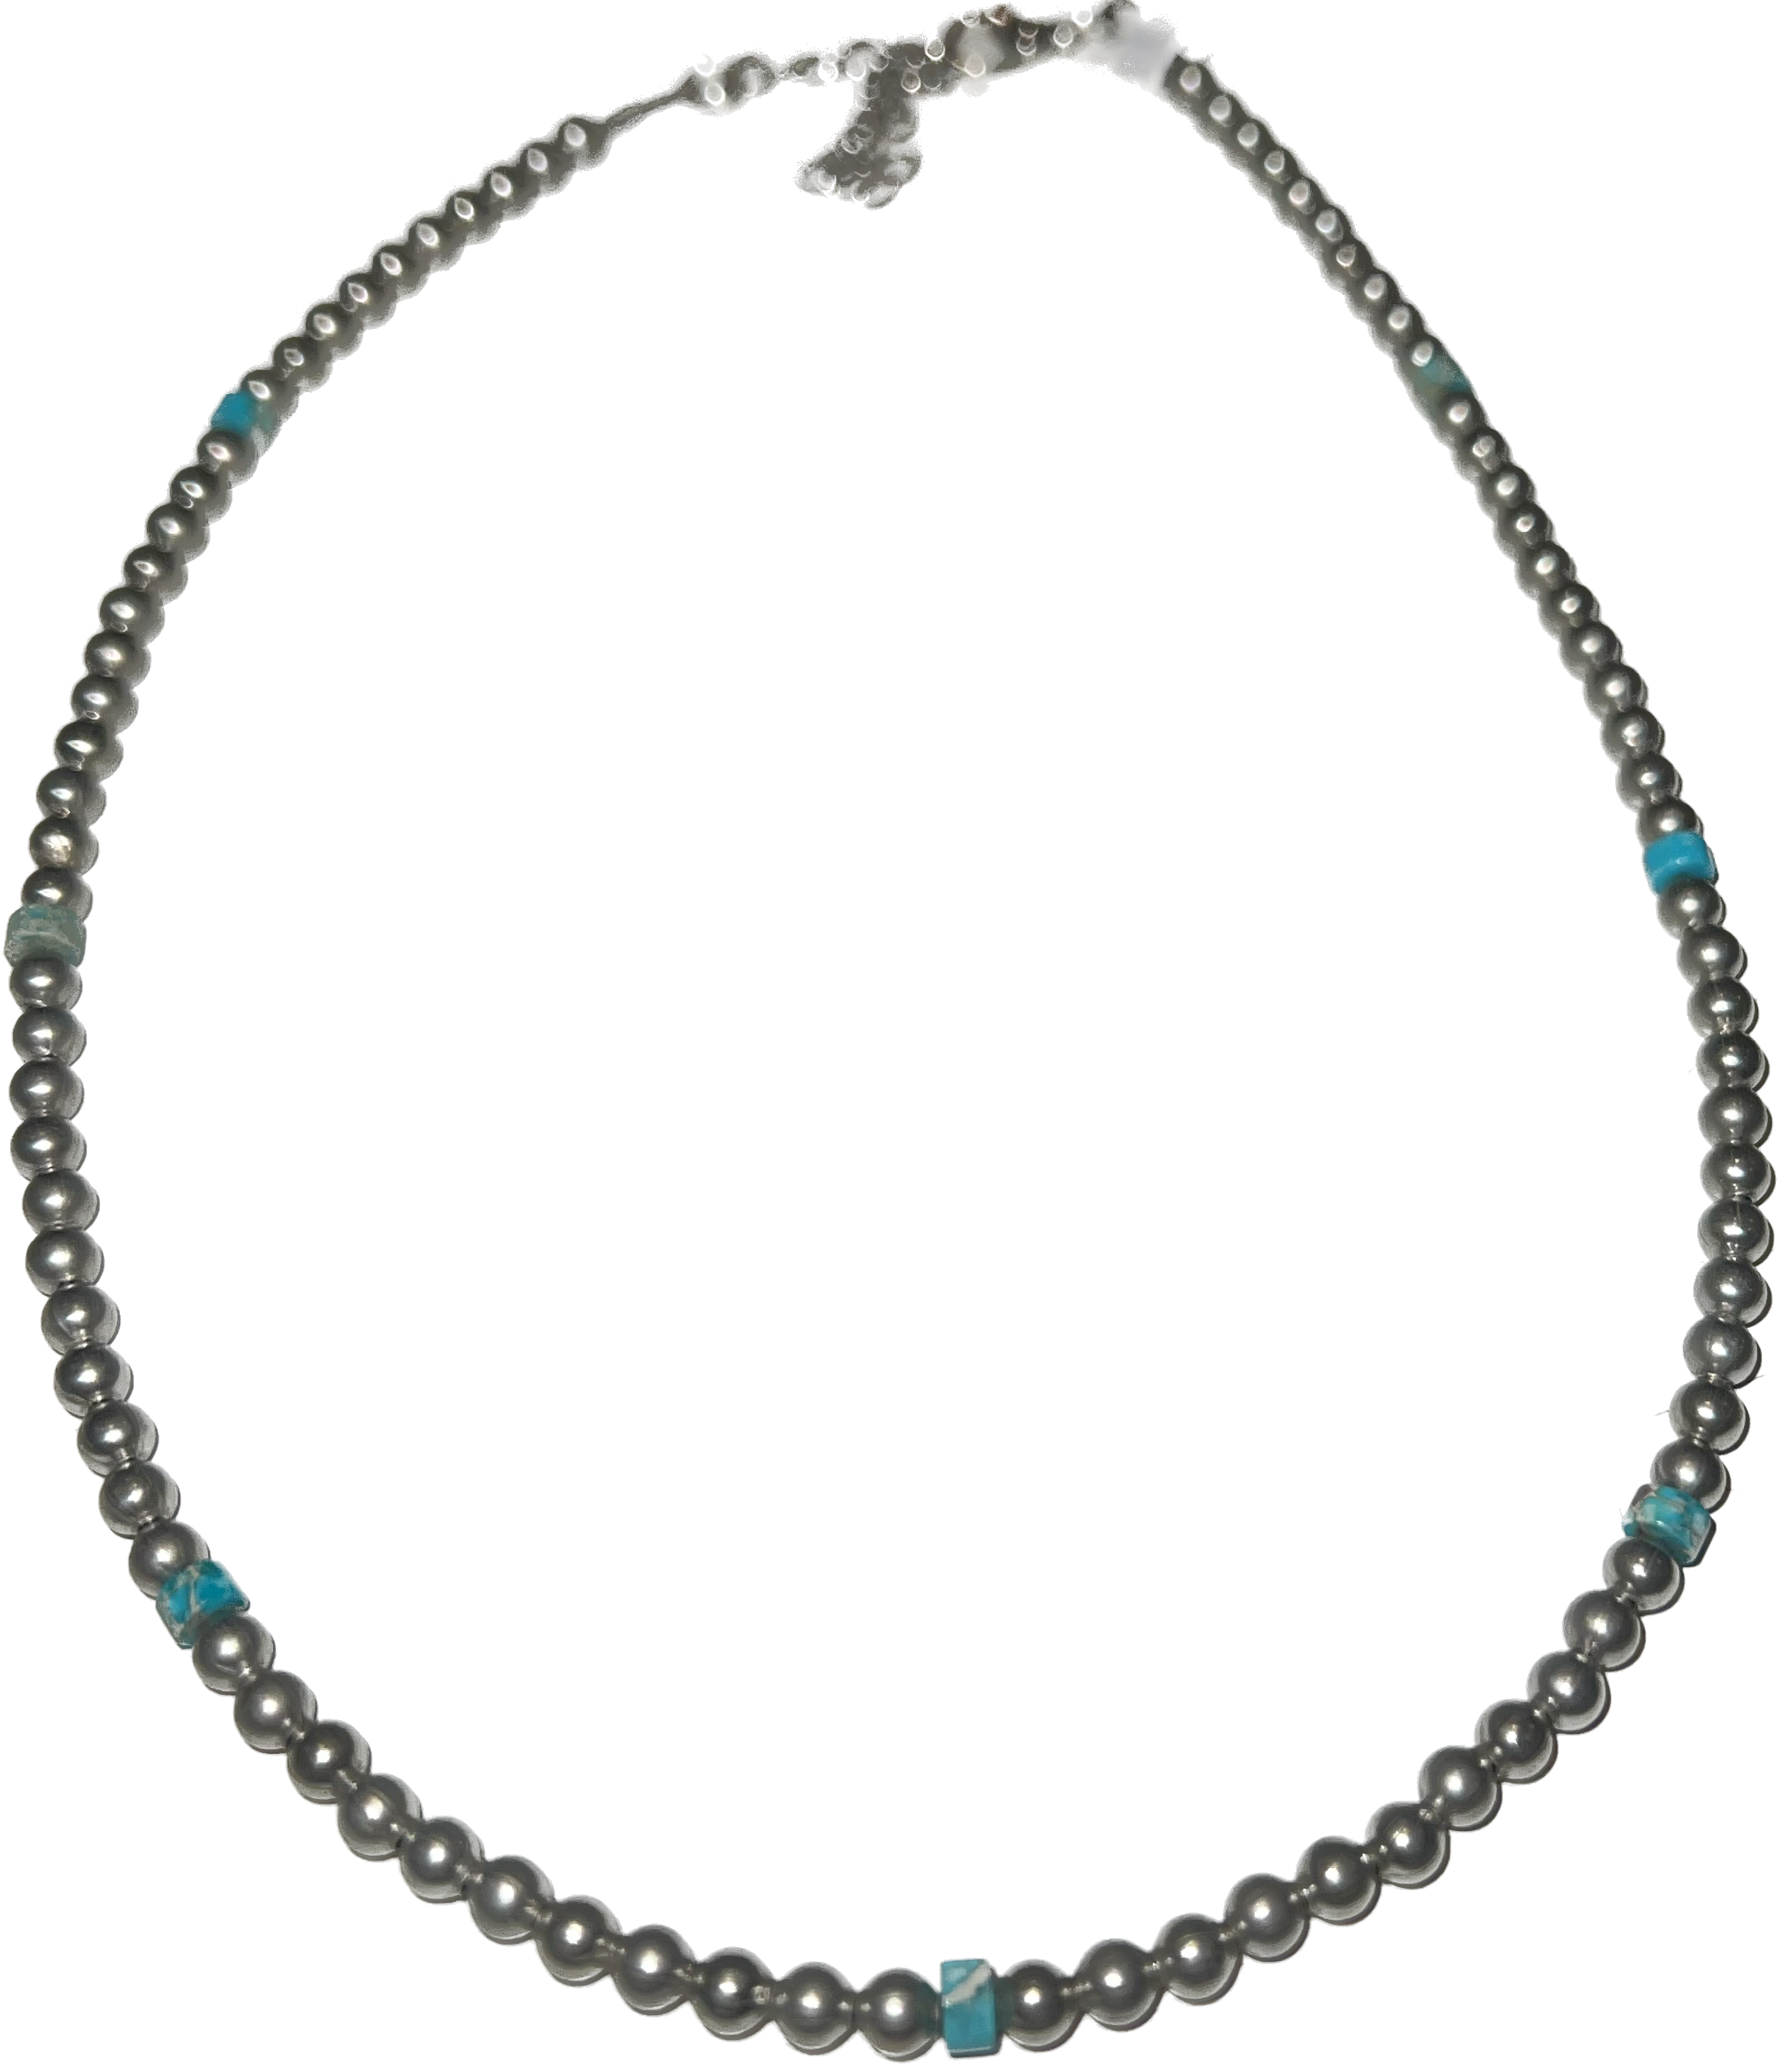 The Bijoux Fab 14 inch silver beaded turquoise necklace